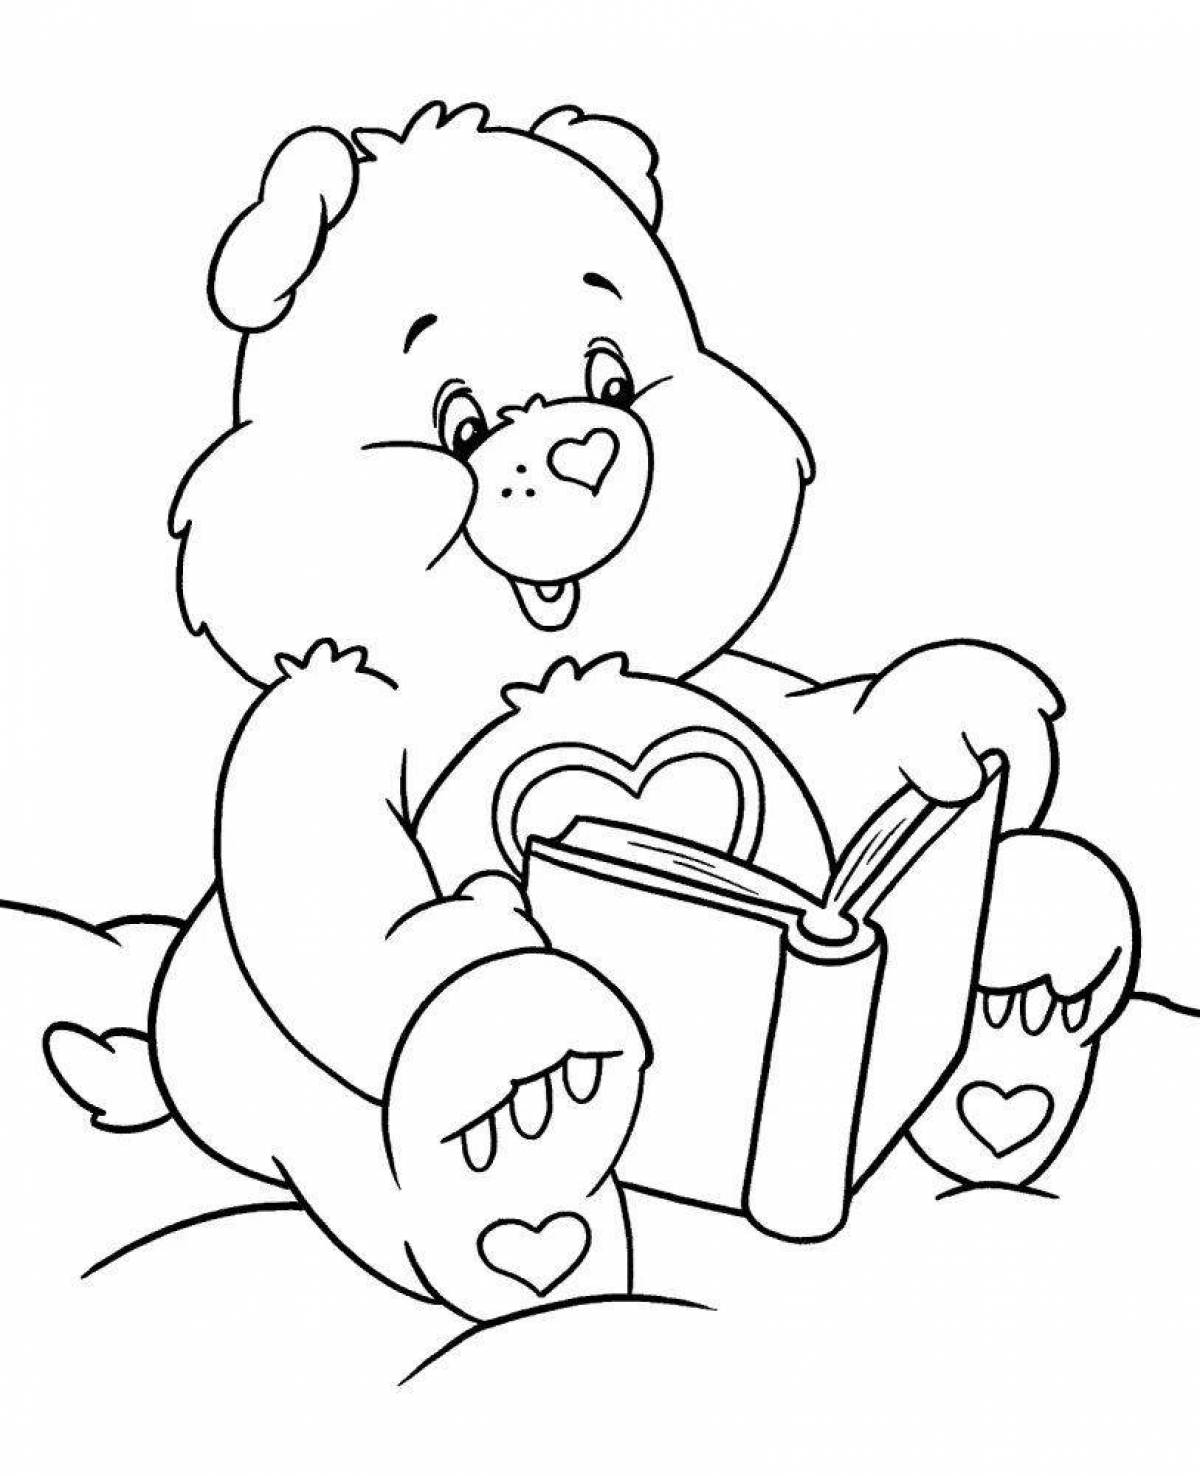 Coloring funny care bears